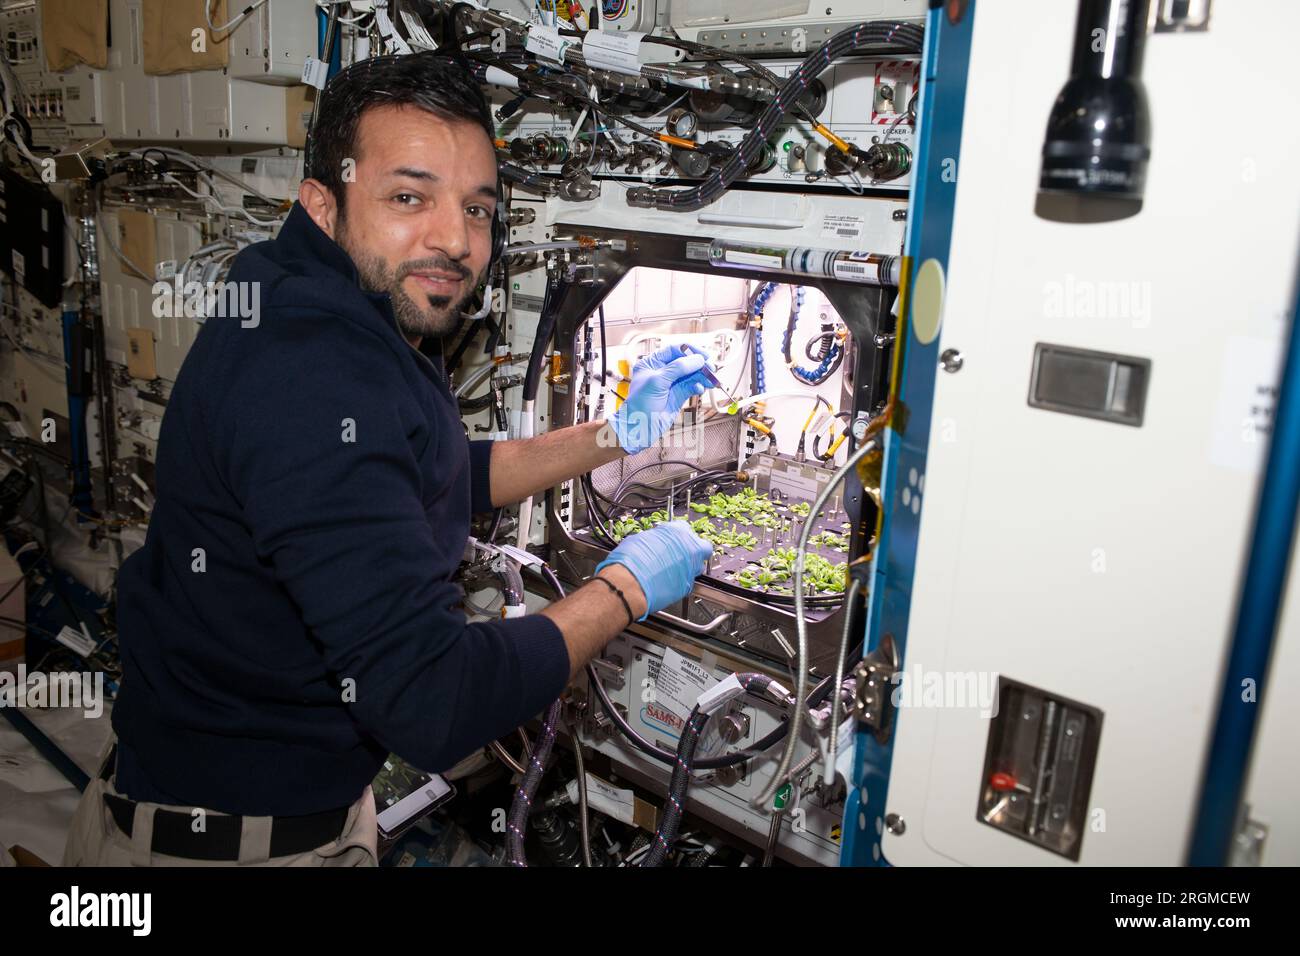 International Space Station, Earth Orbit. 08th Aug, 2023. International Space Station, EARTH ORBIT. 08 August, 2023. United Arab Emirates astronaut and Expedition 69 Flight Engineer Sultan Al Neyadi works in the Kibo laboratory module harvesting leaves from thale cress plants, August 8, 2023 in Earth Orbit. The Plant Habitat space botany experiment is informing researchers how to grow food and sustain crews on future space missions. Credit: NASA/NASA/Alamy Live News Stock Photo